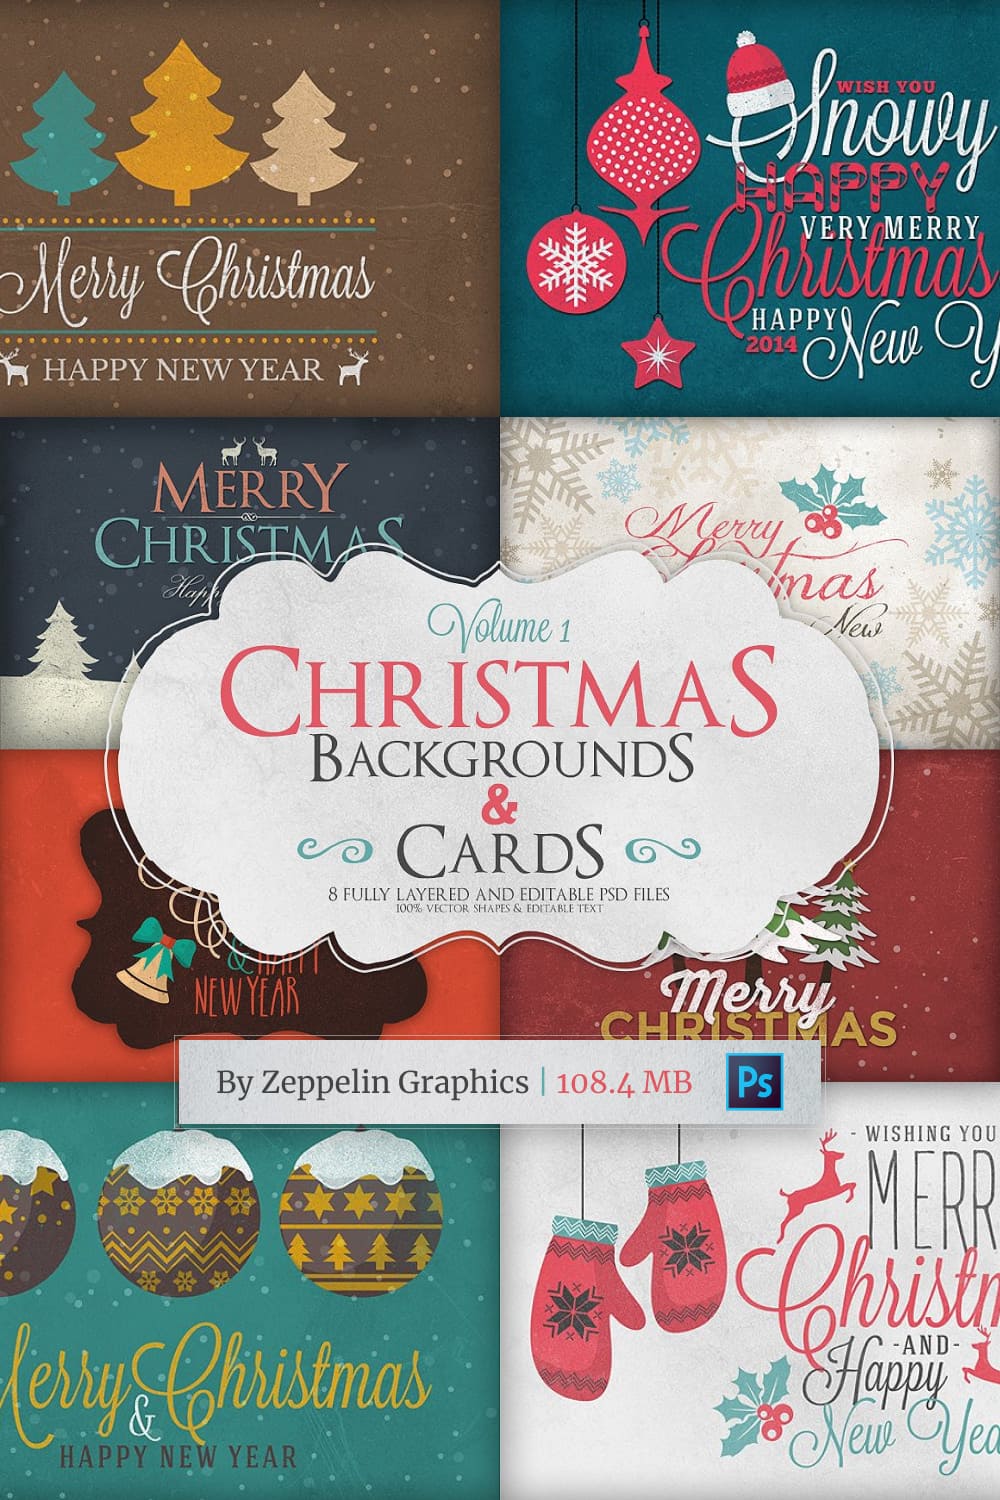 Christmas Background & Cards.